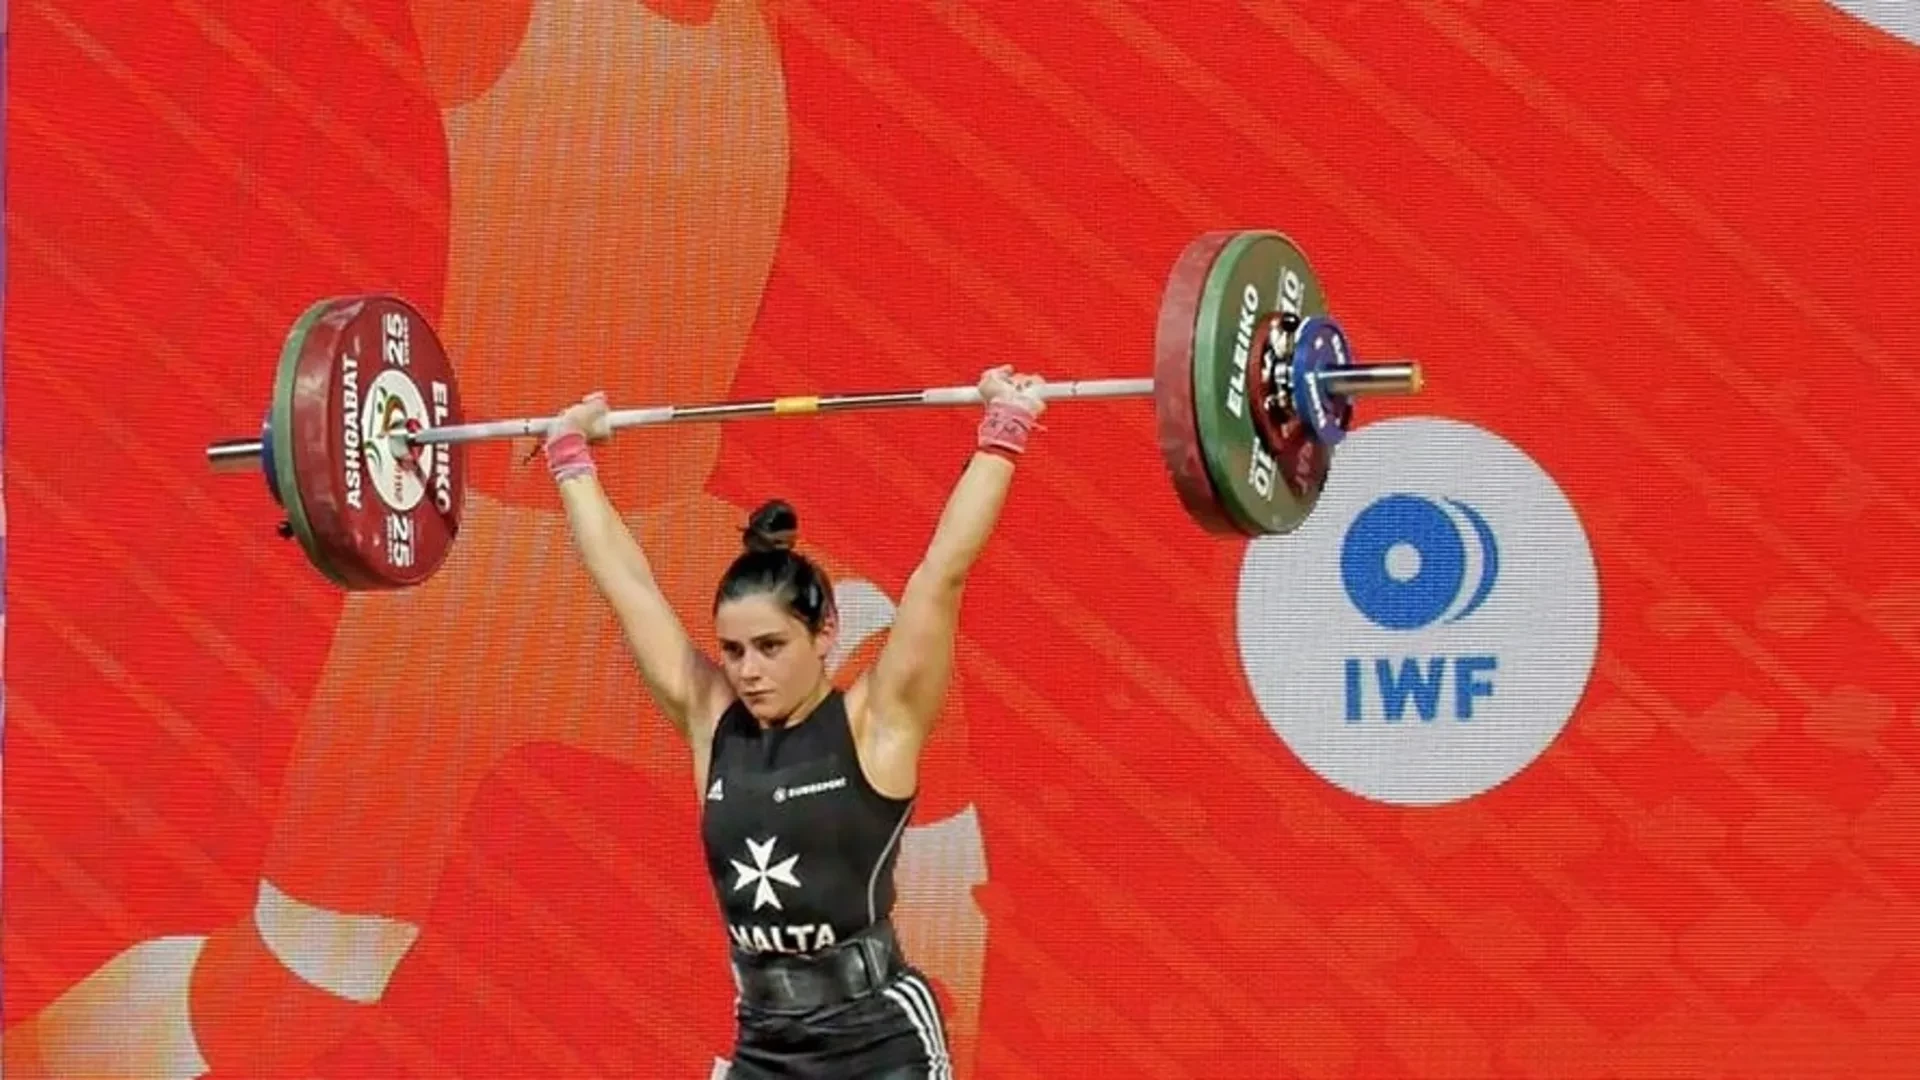 Yazmin Zammit Stevens has set her sights on becoming the first Maltese Olympic female weightlifter ©IWF